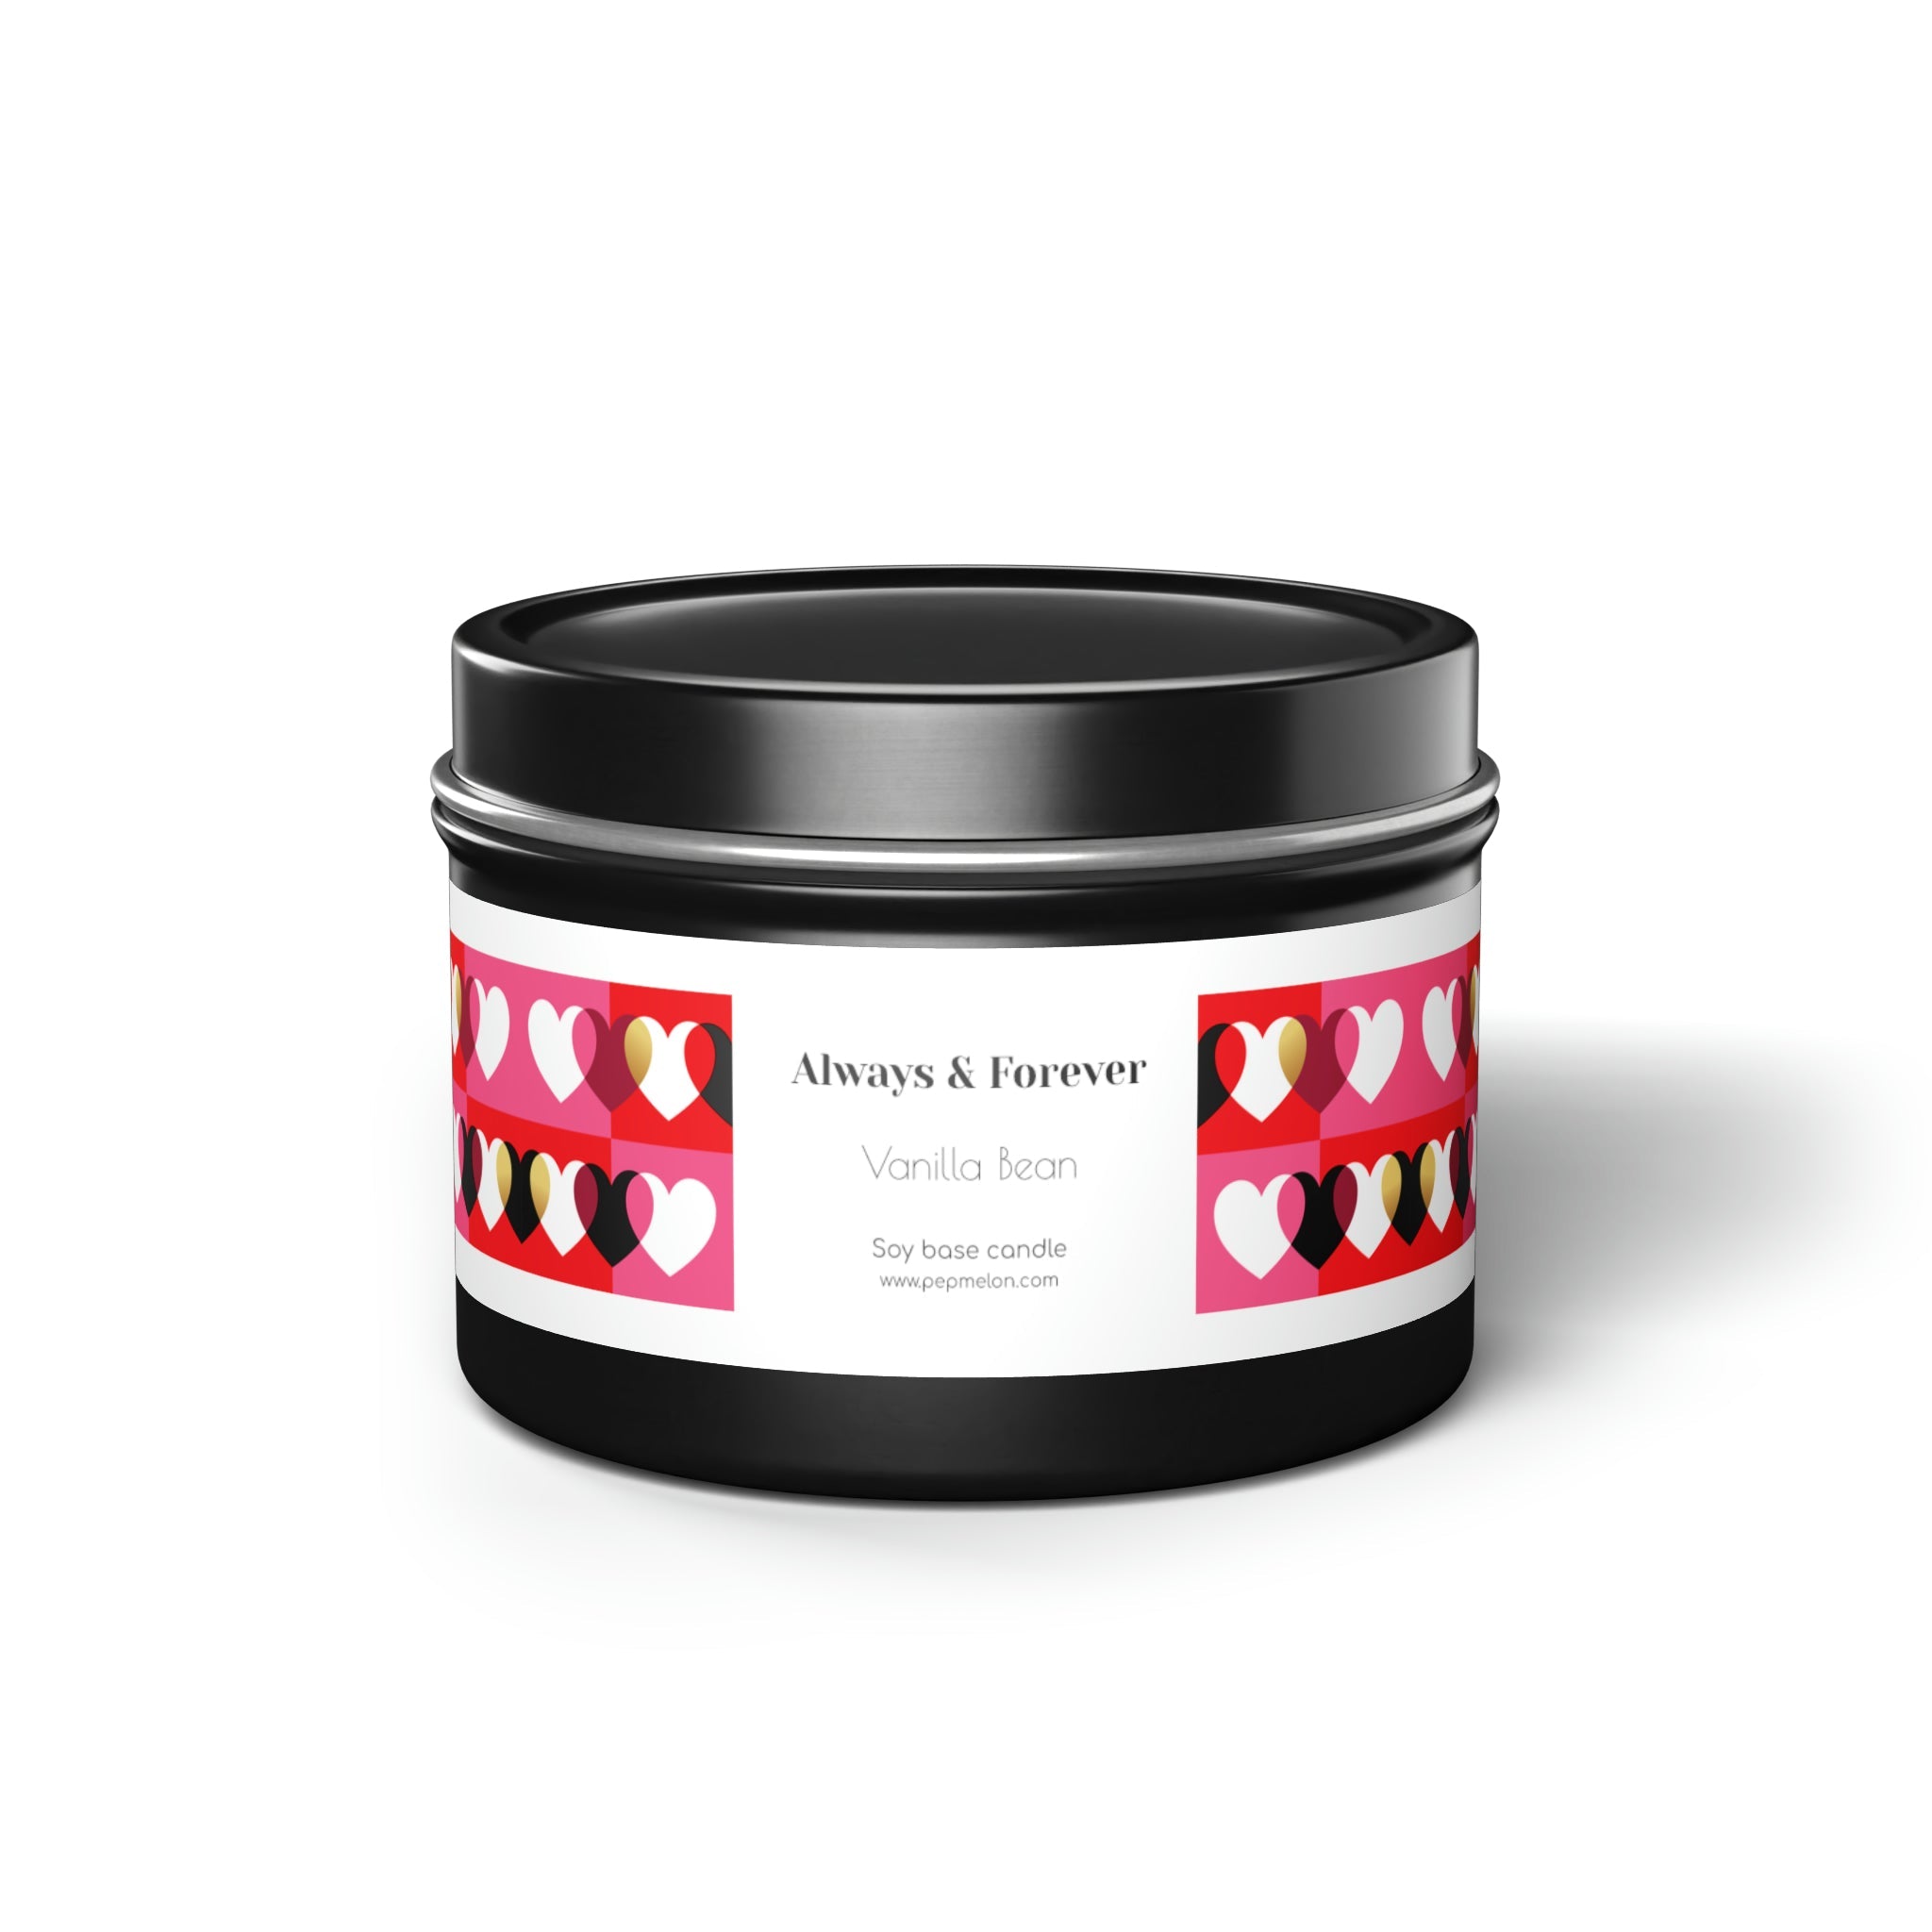 Vanilla Bean Always & Forever Soy base candle love, valentine's day gift Tin Candles-6